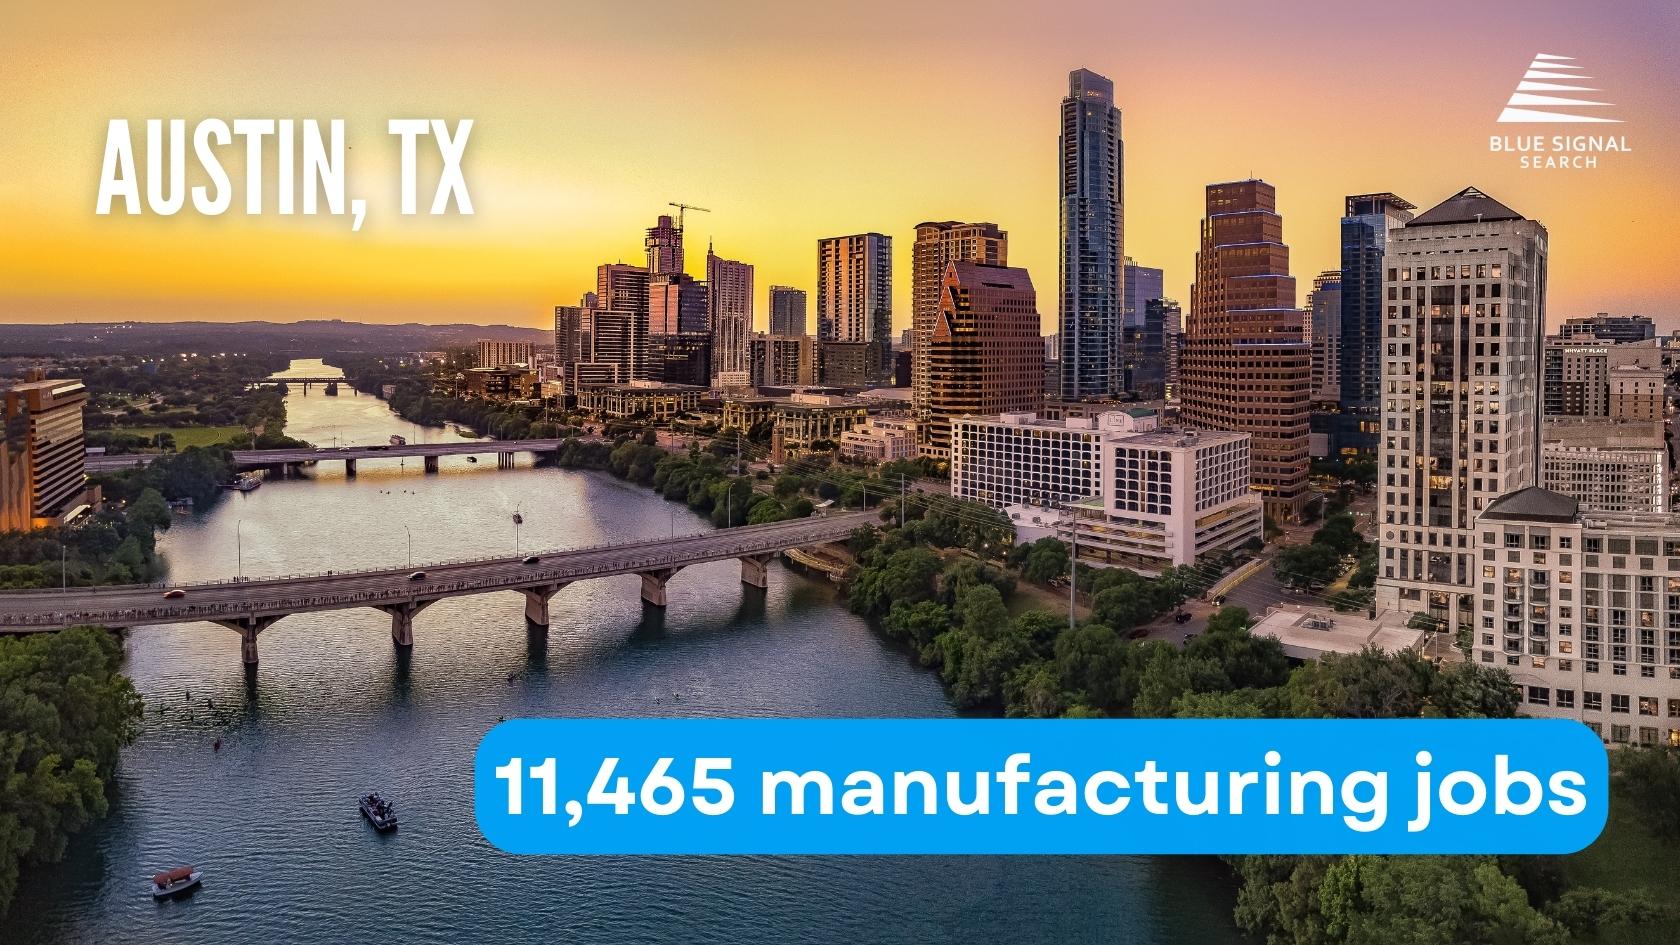 Skyline of Austin, TX with key manufacturing statistics highlighted.